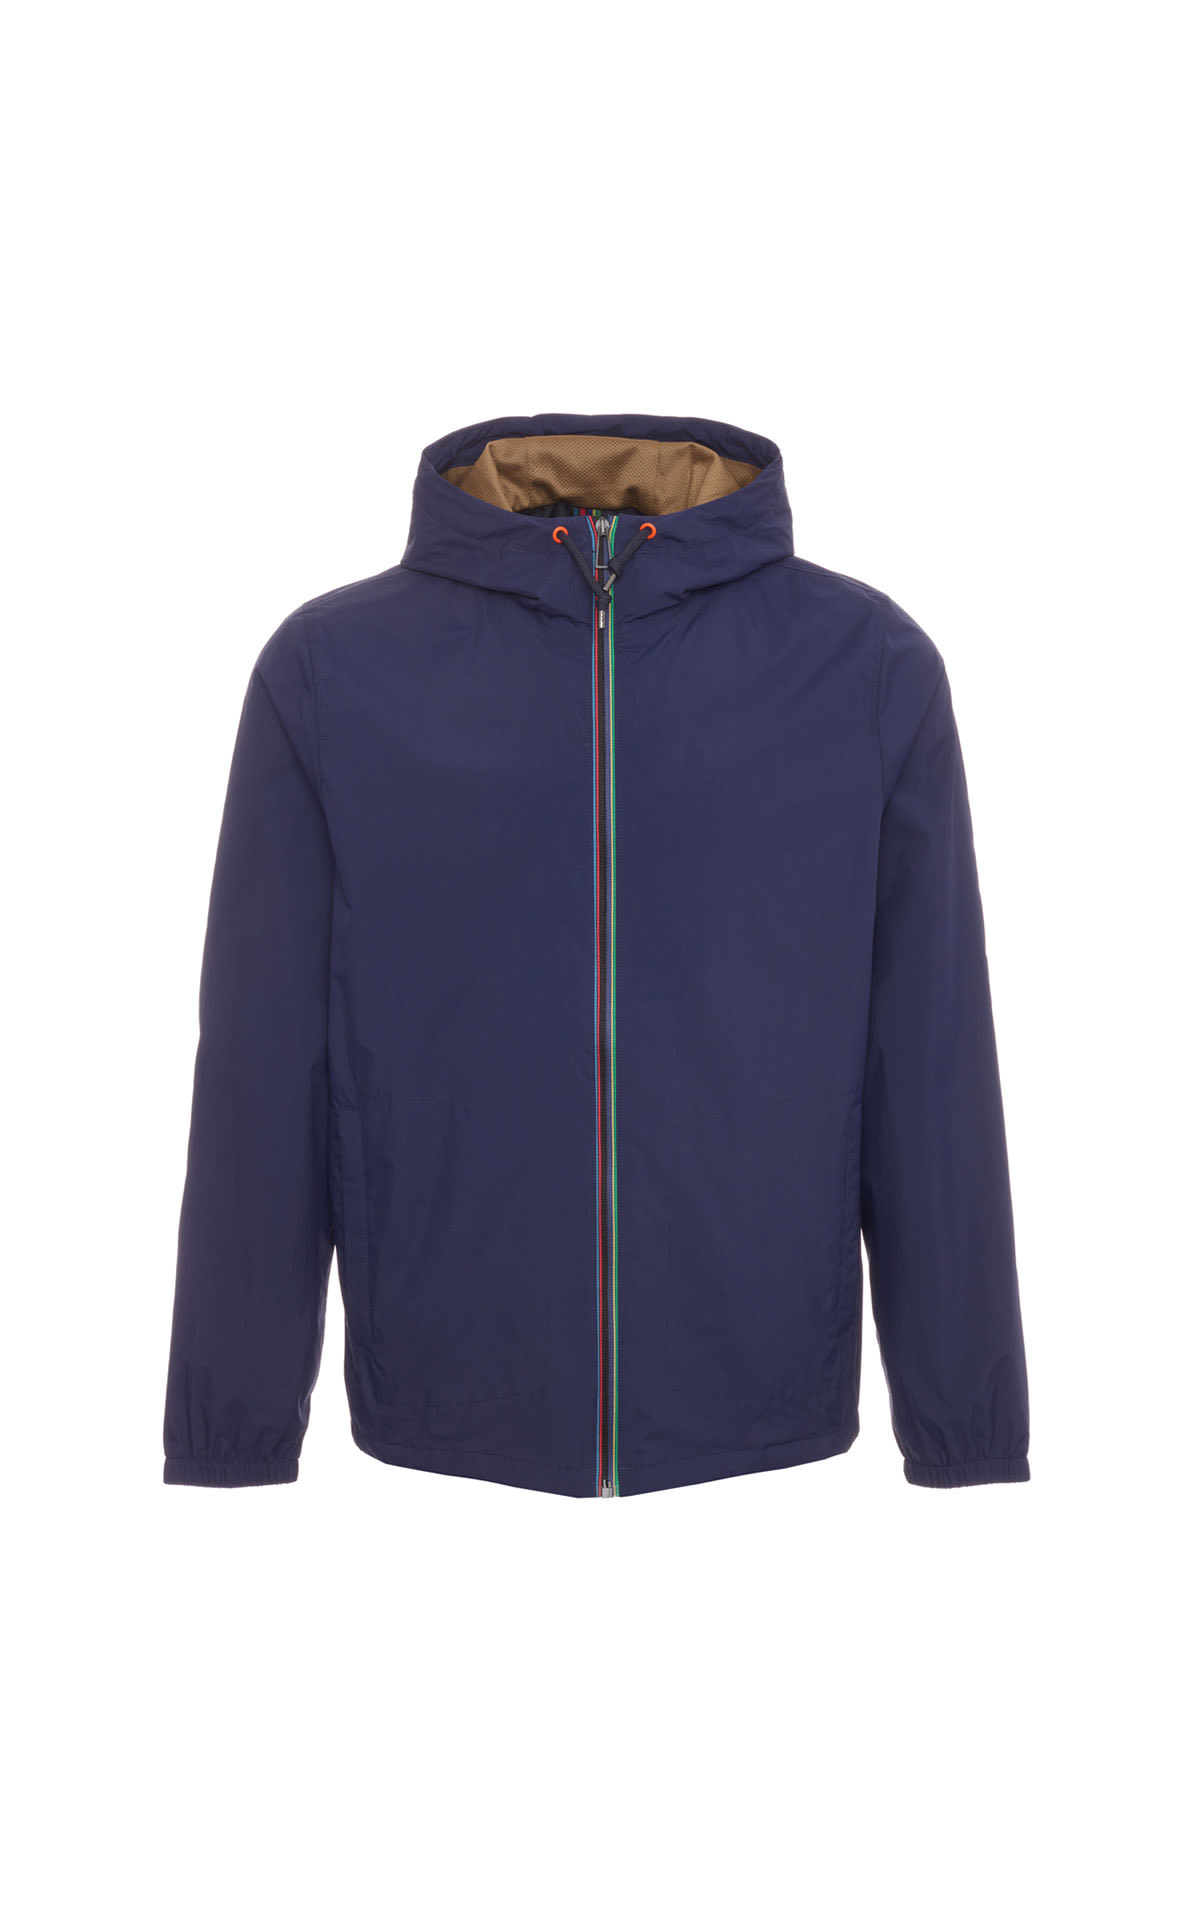 Paul Smith Hooded jacket from Bicester Village